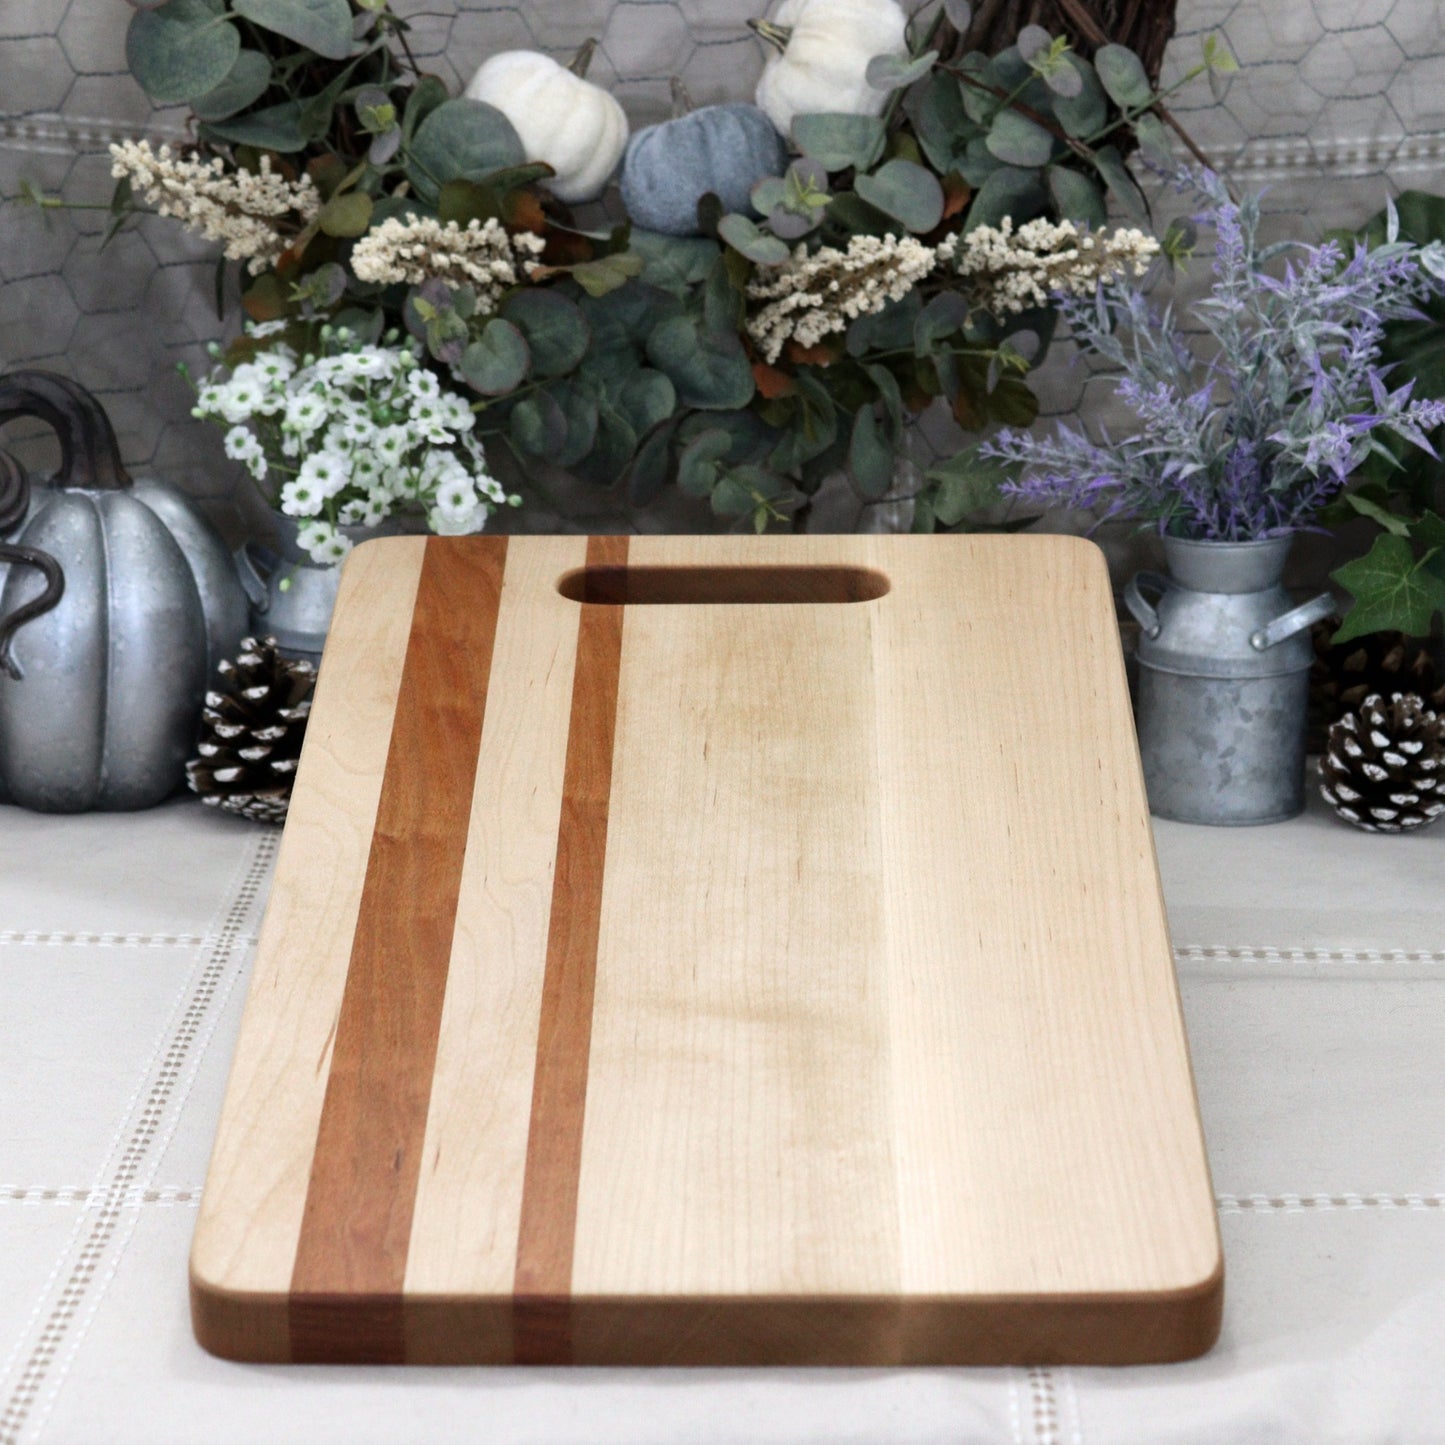 4-Piece Maple Serving Set: Maple and Cherry Serving Tray, Cutting Board, Wine Carrier & Coaster Set + Free Gifts